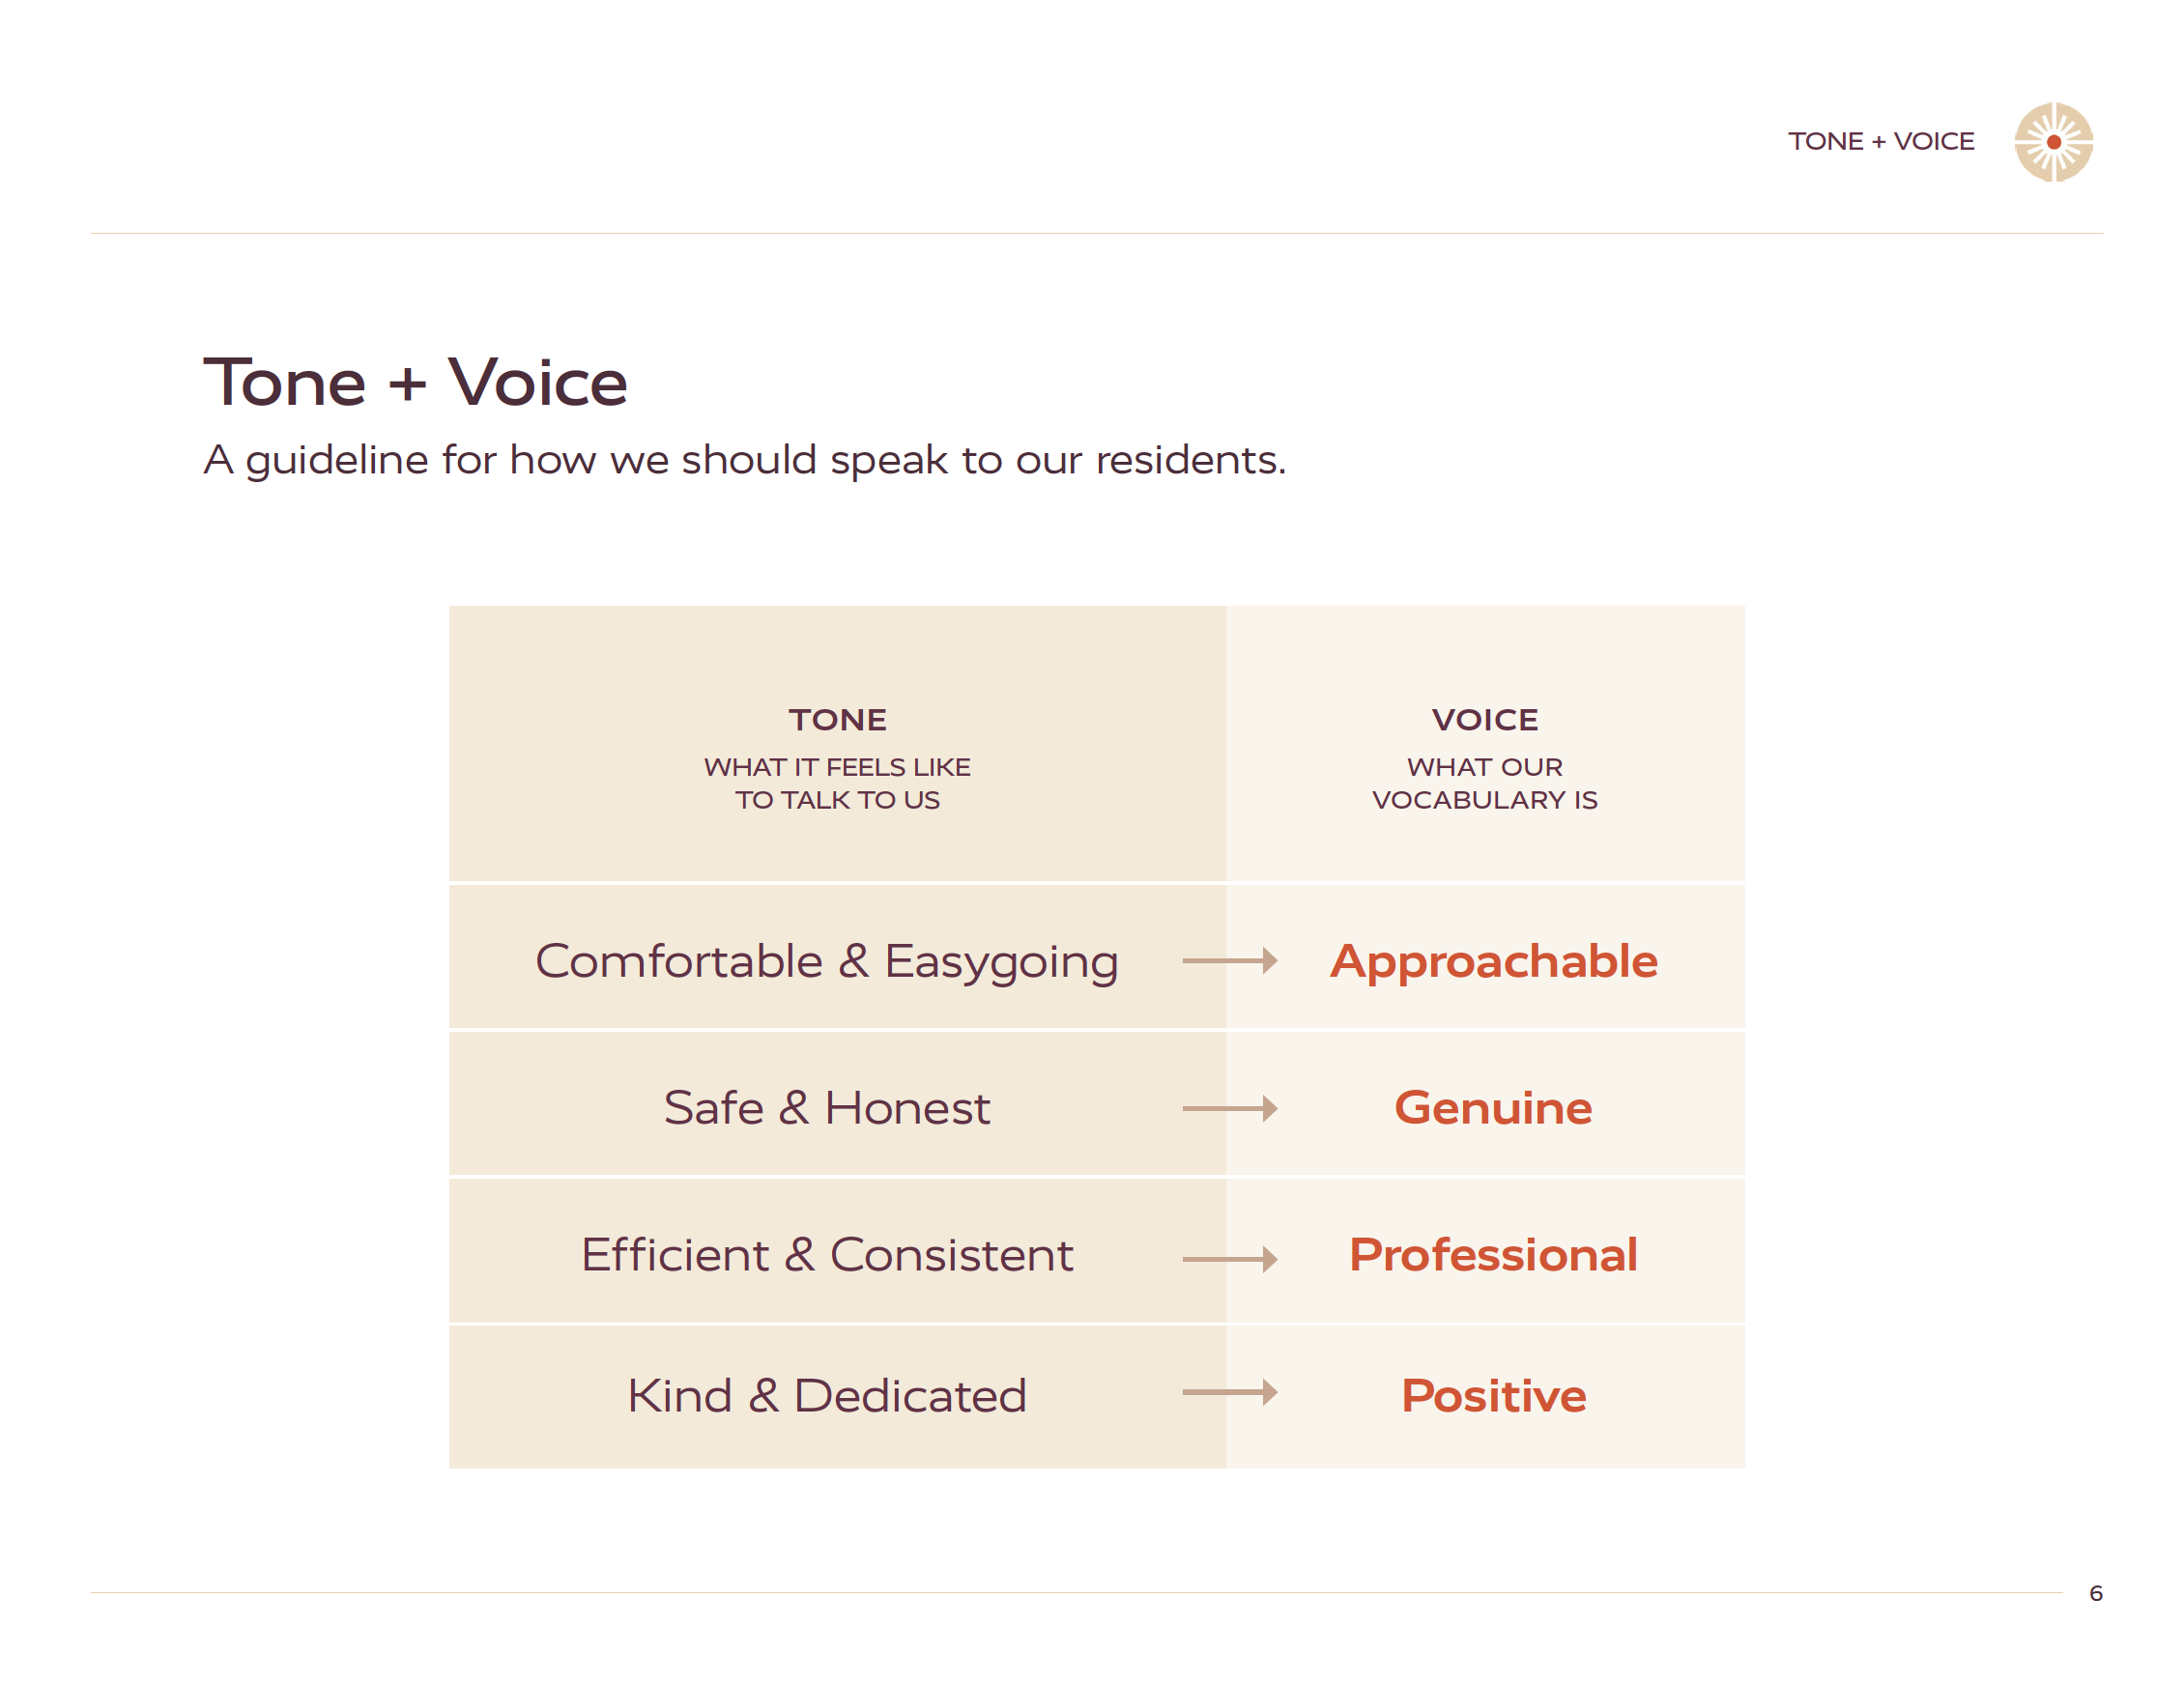 A page out of The Calo brand guide highlighting their tone and voice information